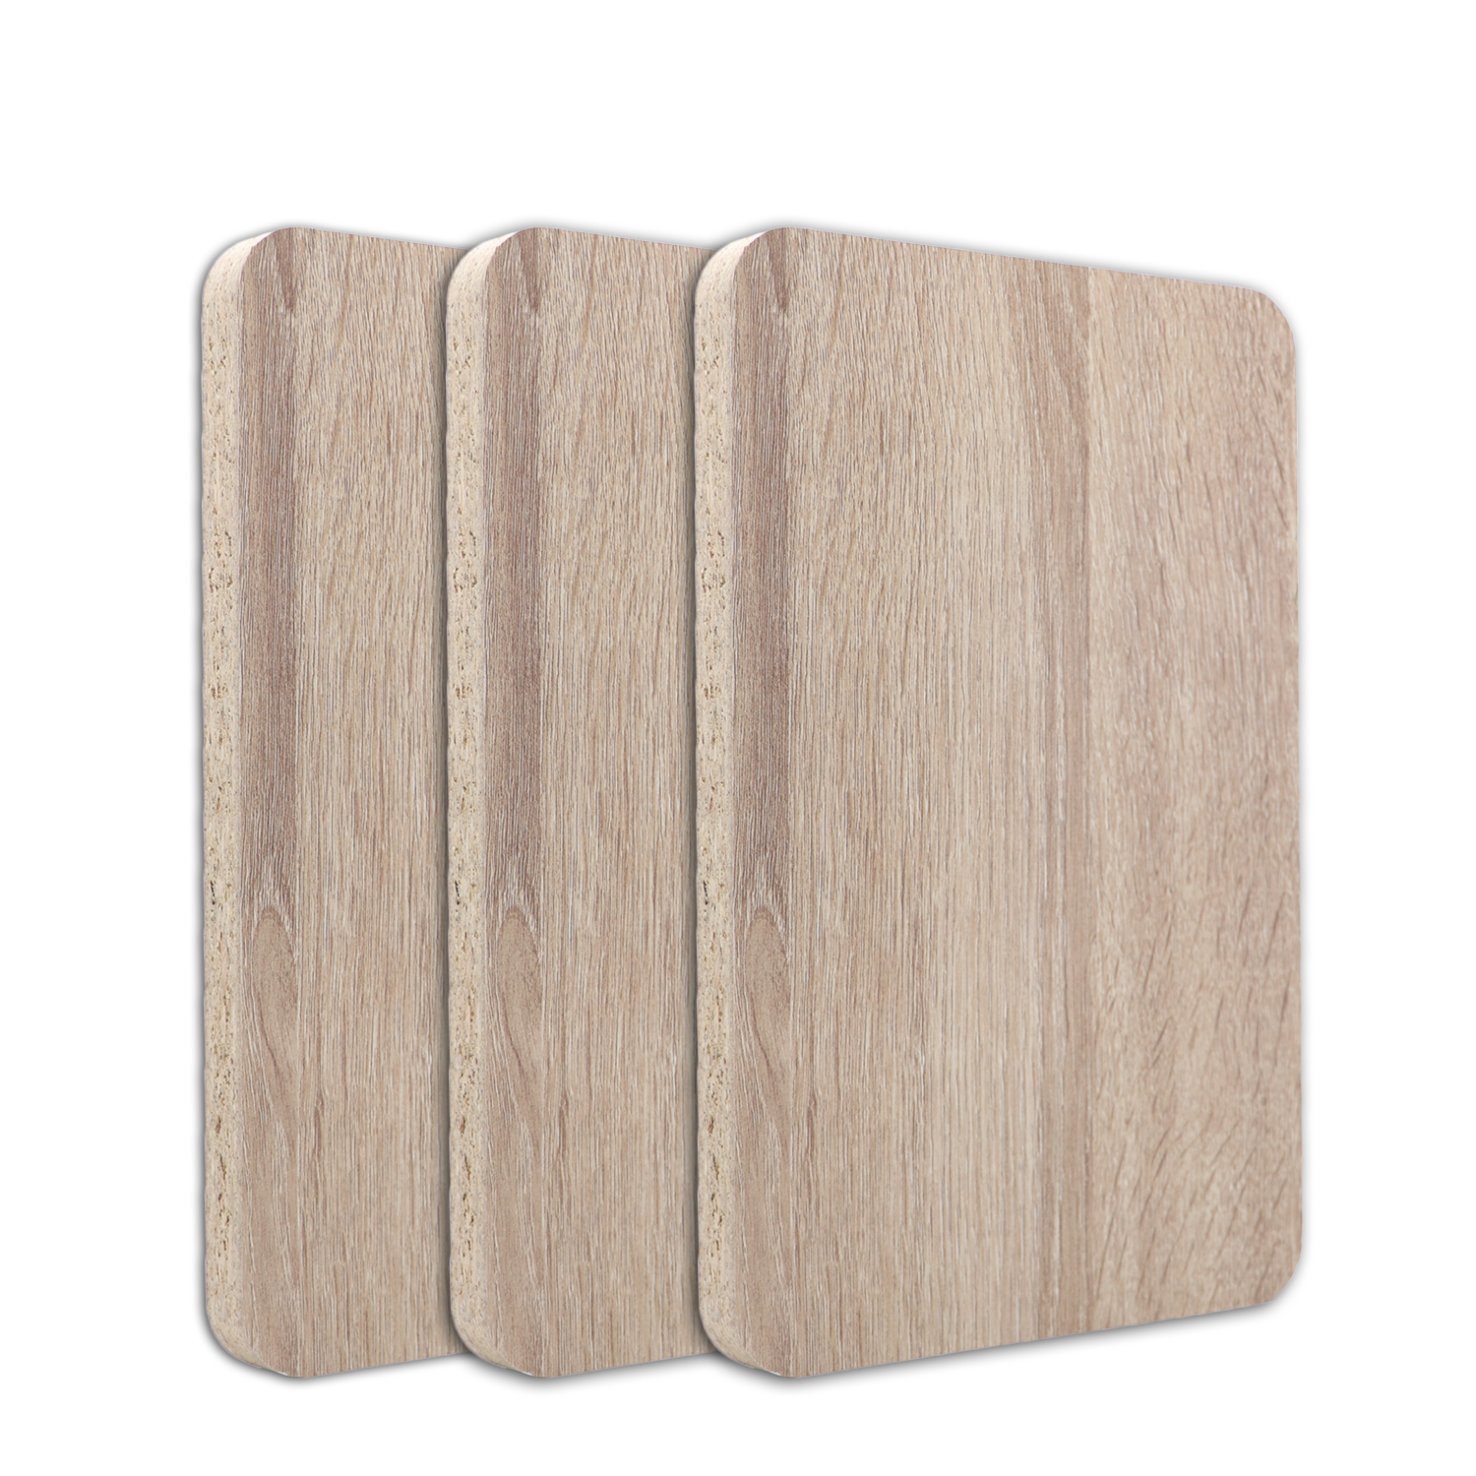 Cheap Price Melamine Faced Particleboard Wood Grain Coated Chipboard